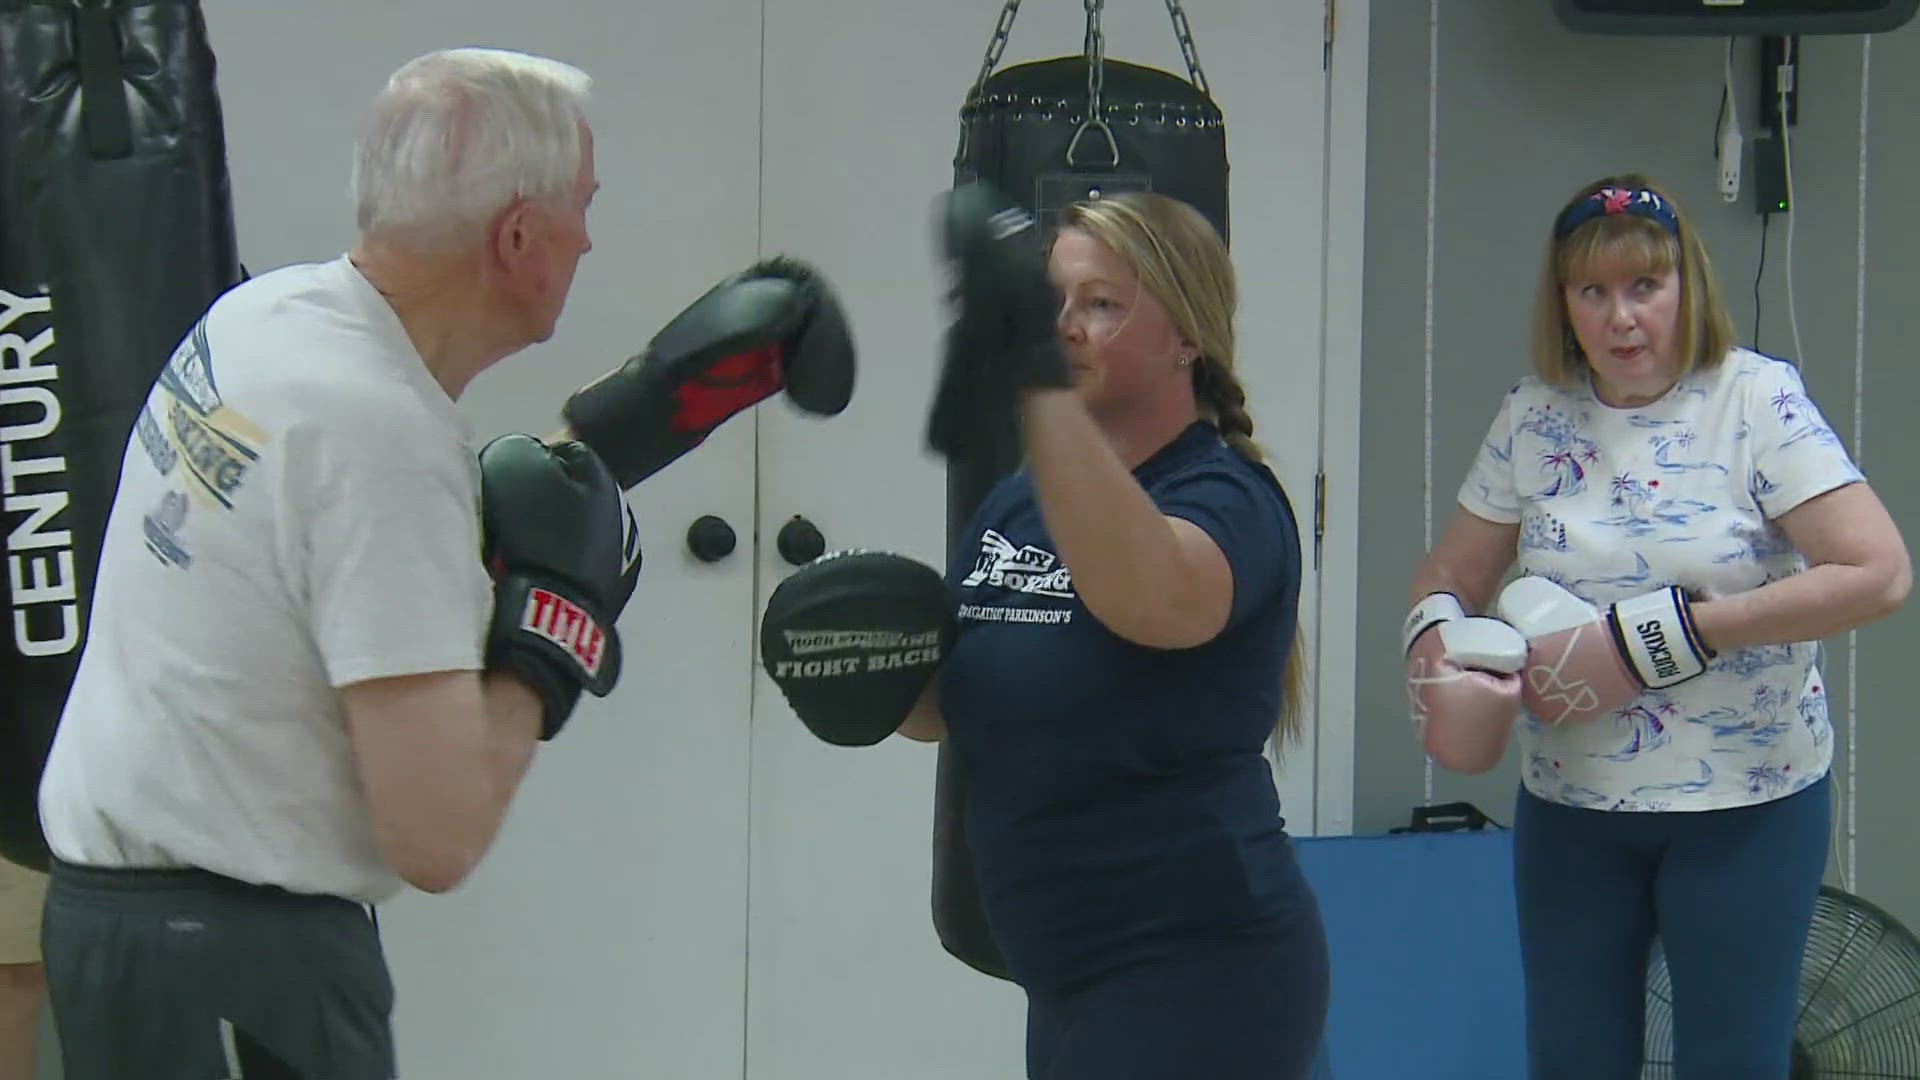 Rock Steady offers boxing classes to help get people with Parkinson’s moving.